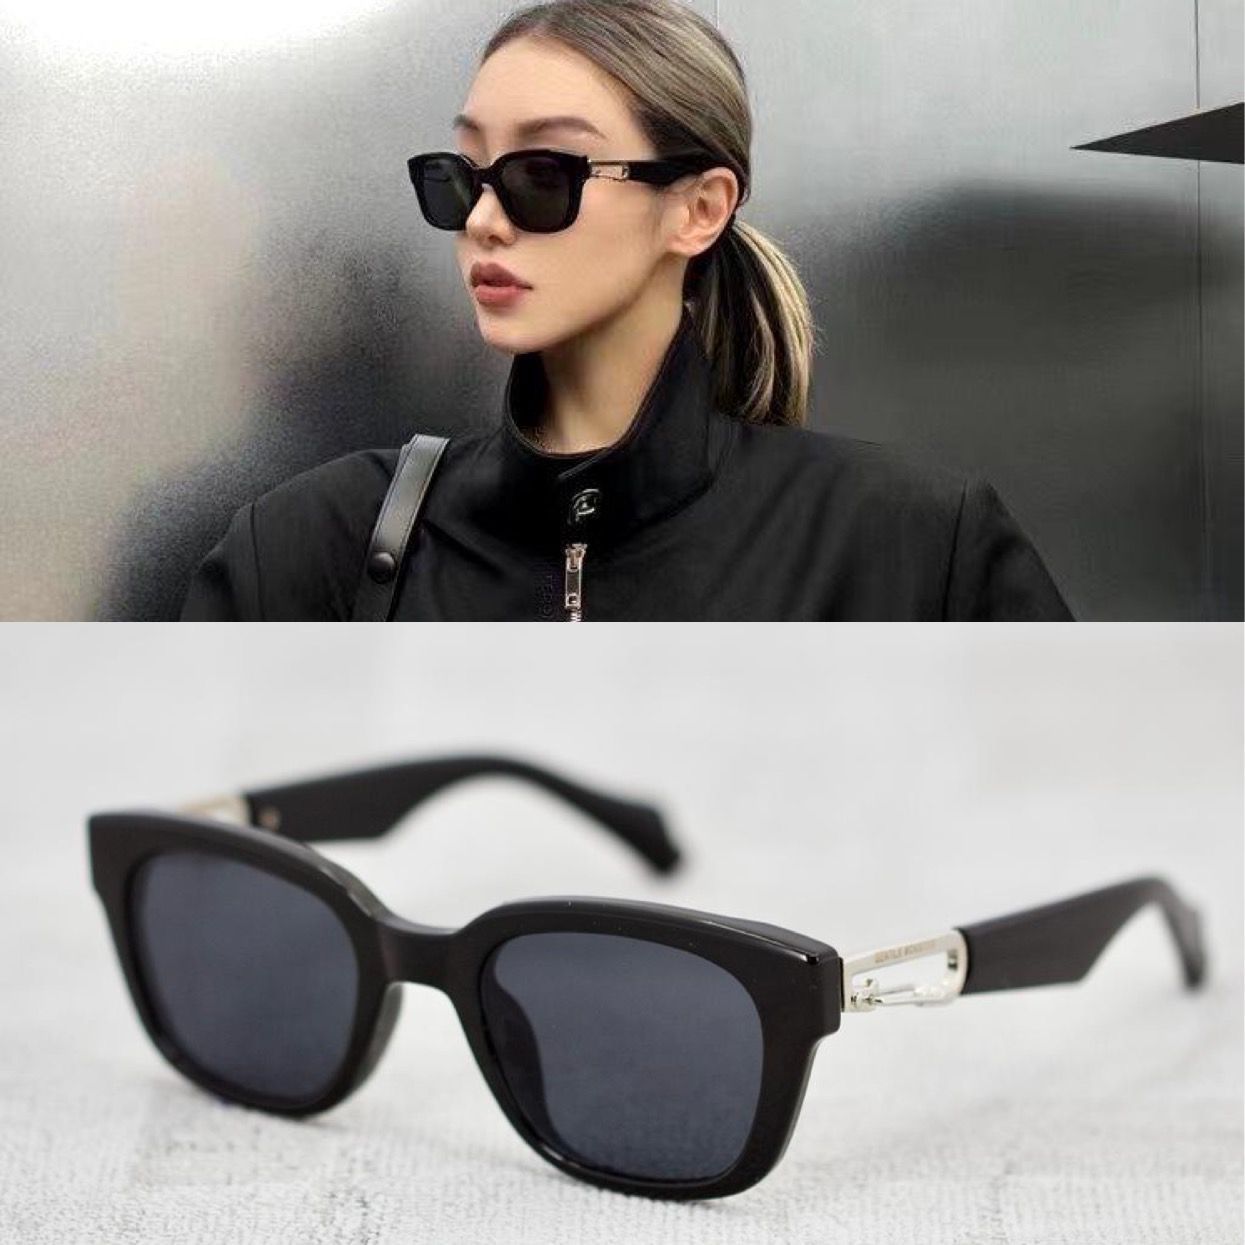 Buy New Arrival Classic Square Sunglasses For Men And Women -Jackmarc